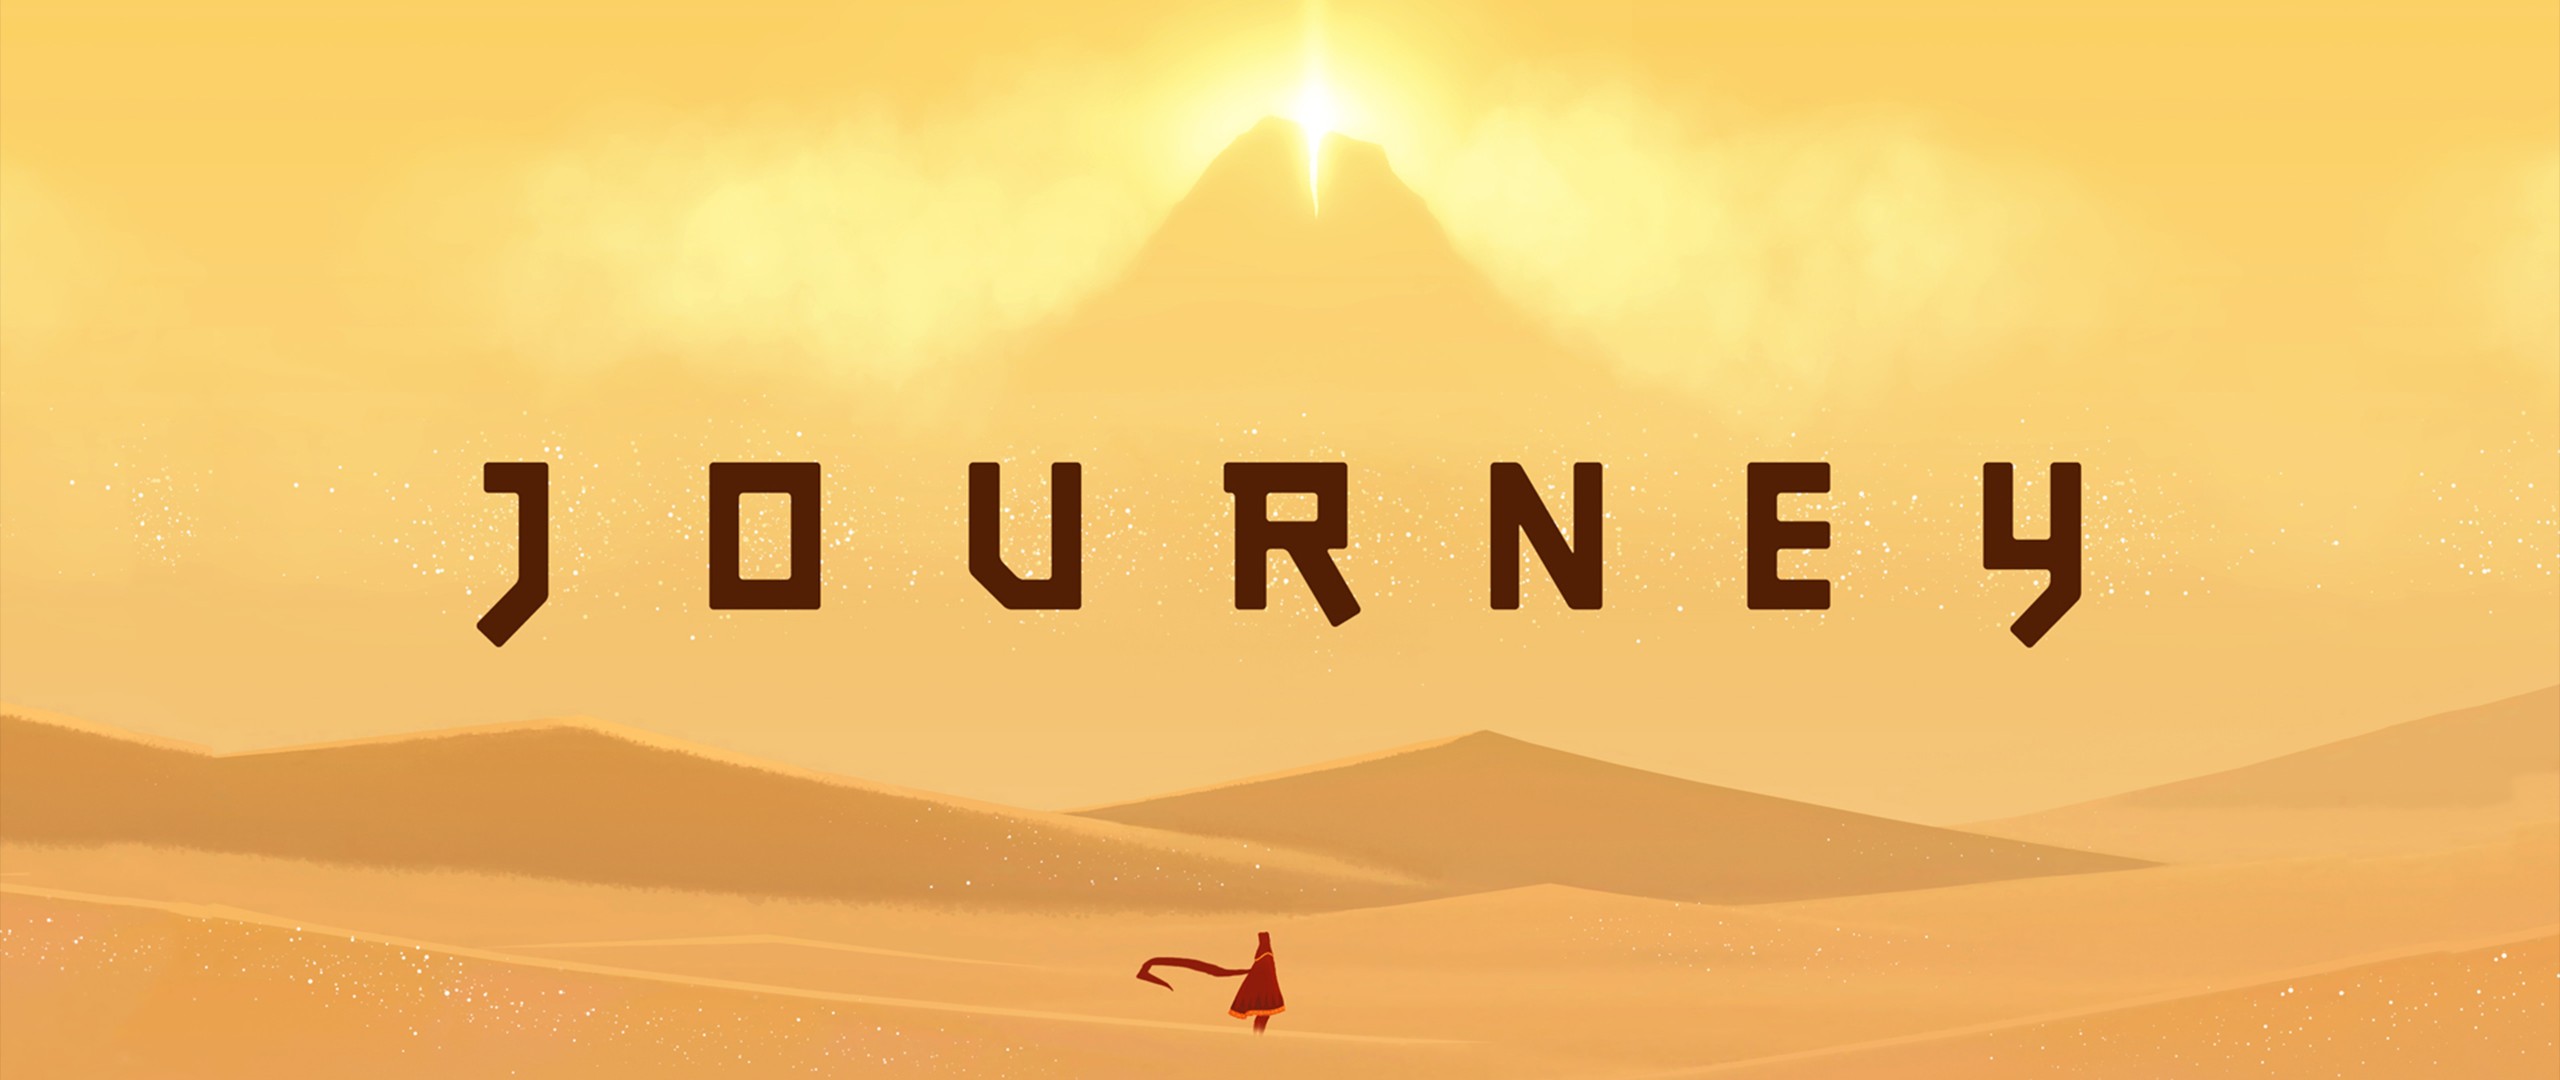 ultra wide, Video games, Journey (game) Wallpaper